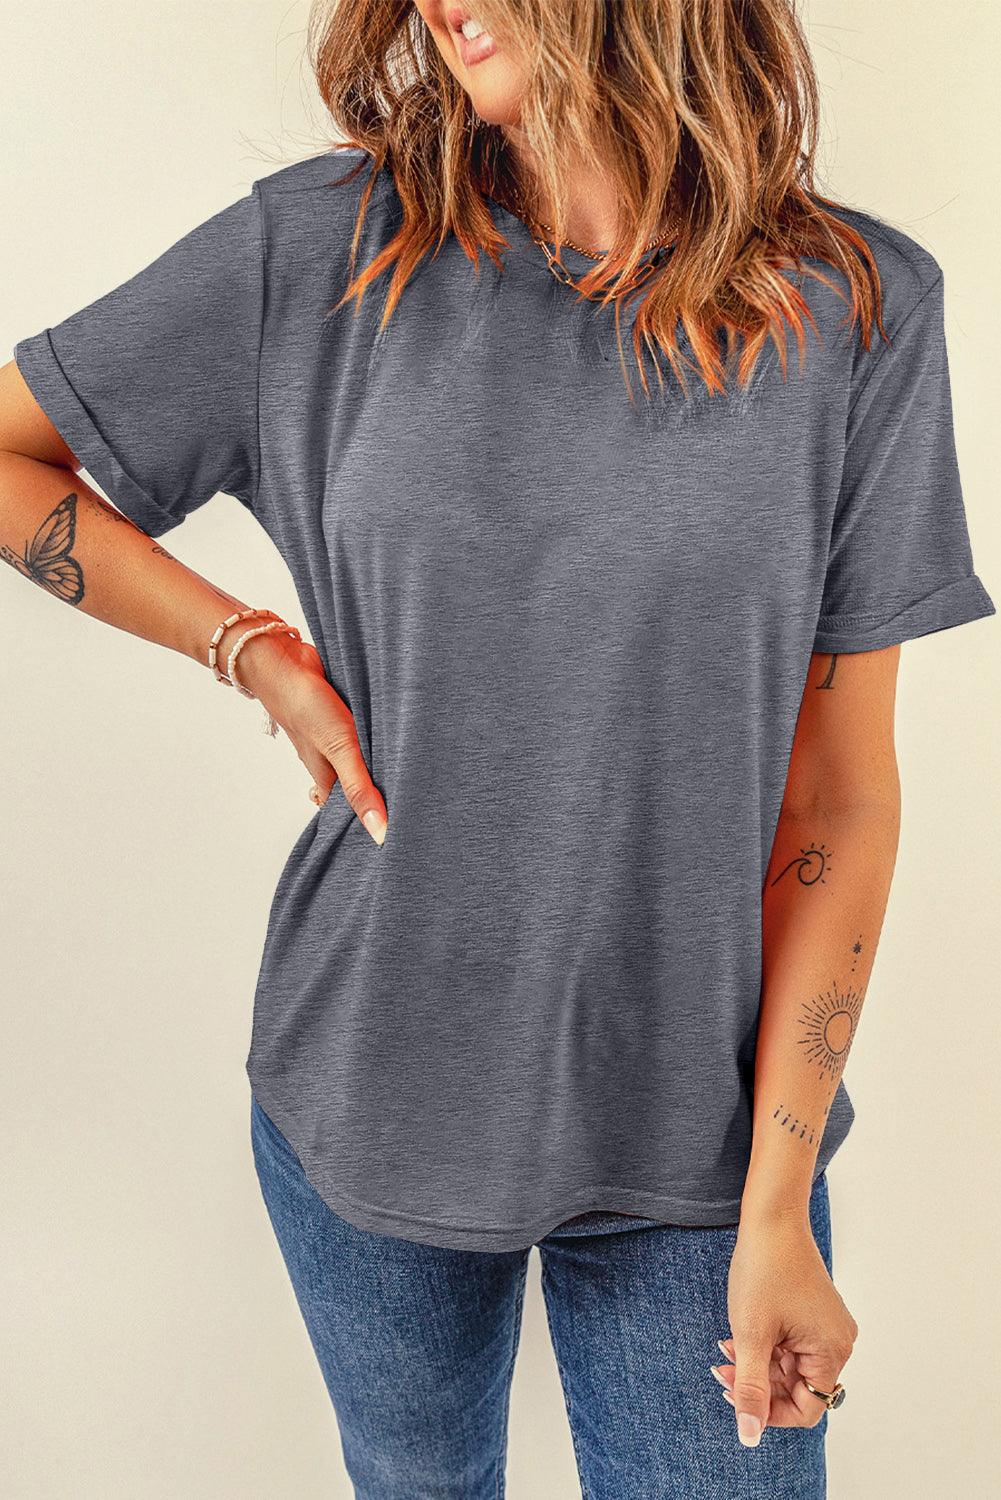 Womens Summer Tops Fashion Casual Solid Crew Neck Loose Gray T-shirt Pullover Spring